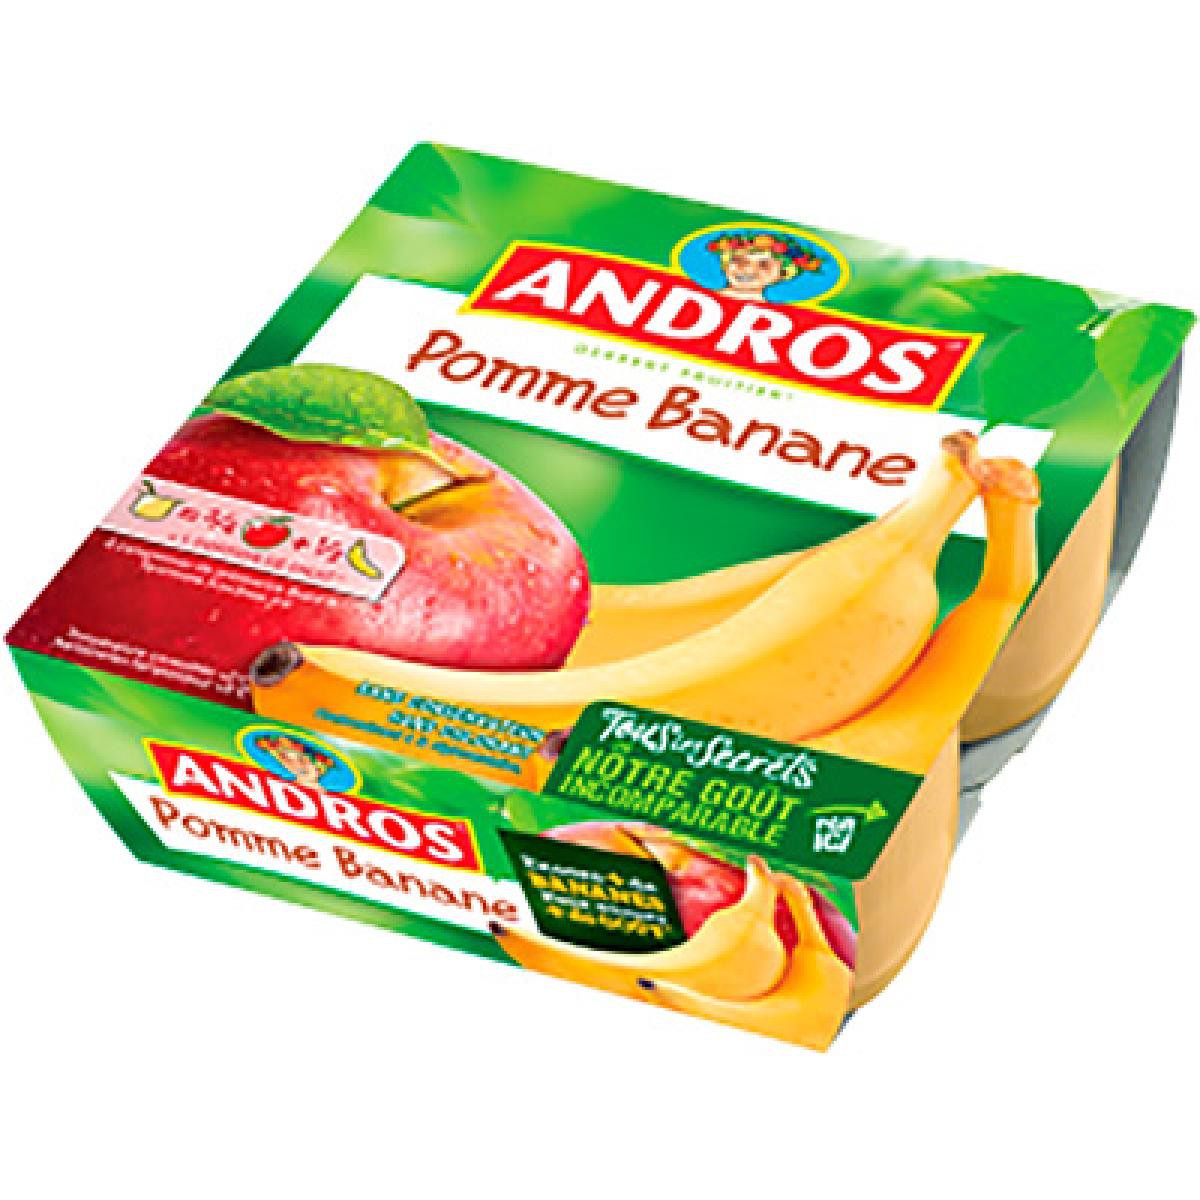 4X100G Compote Pomme Banane Andros - DRH MARKET Sarl